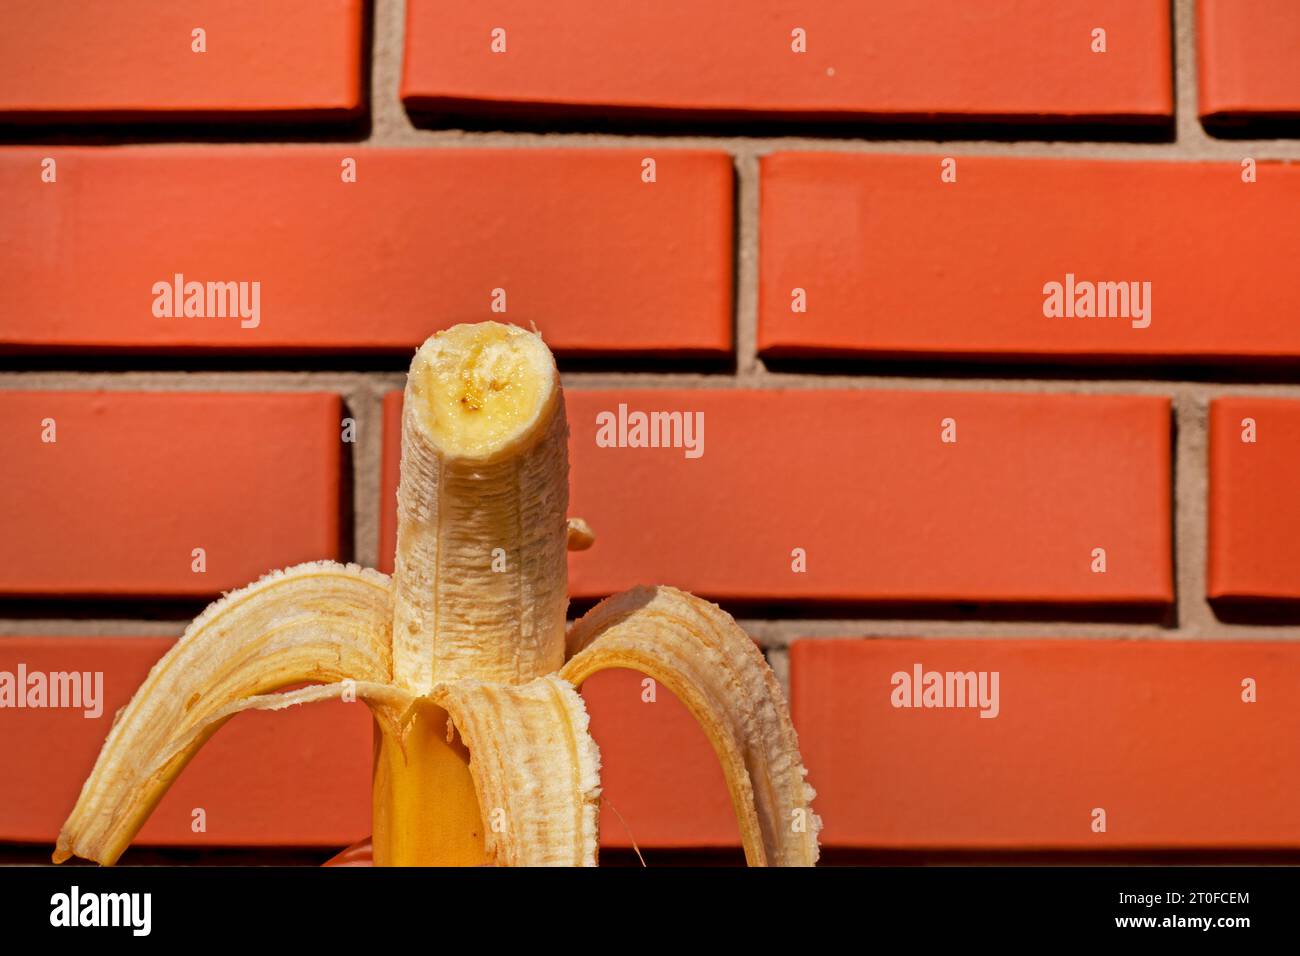 bitten piece of peeled ripe banana from the peel against a brick wall background Stock Photo